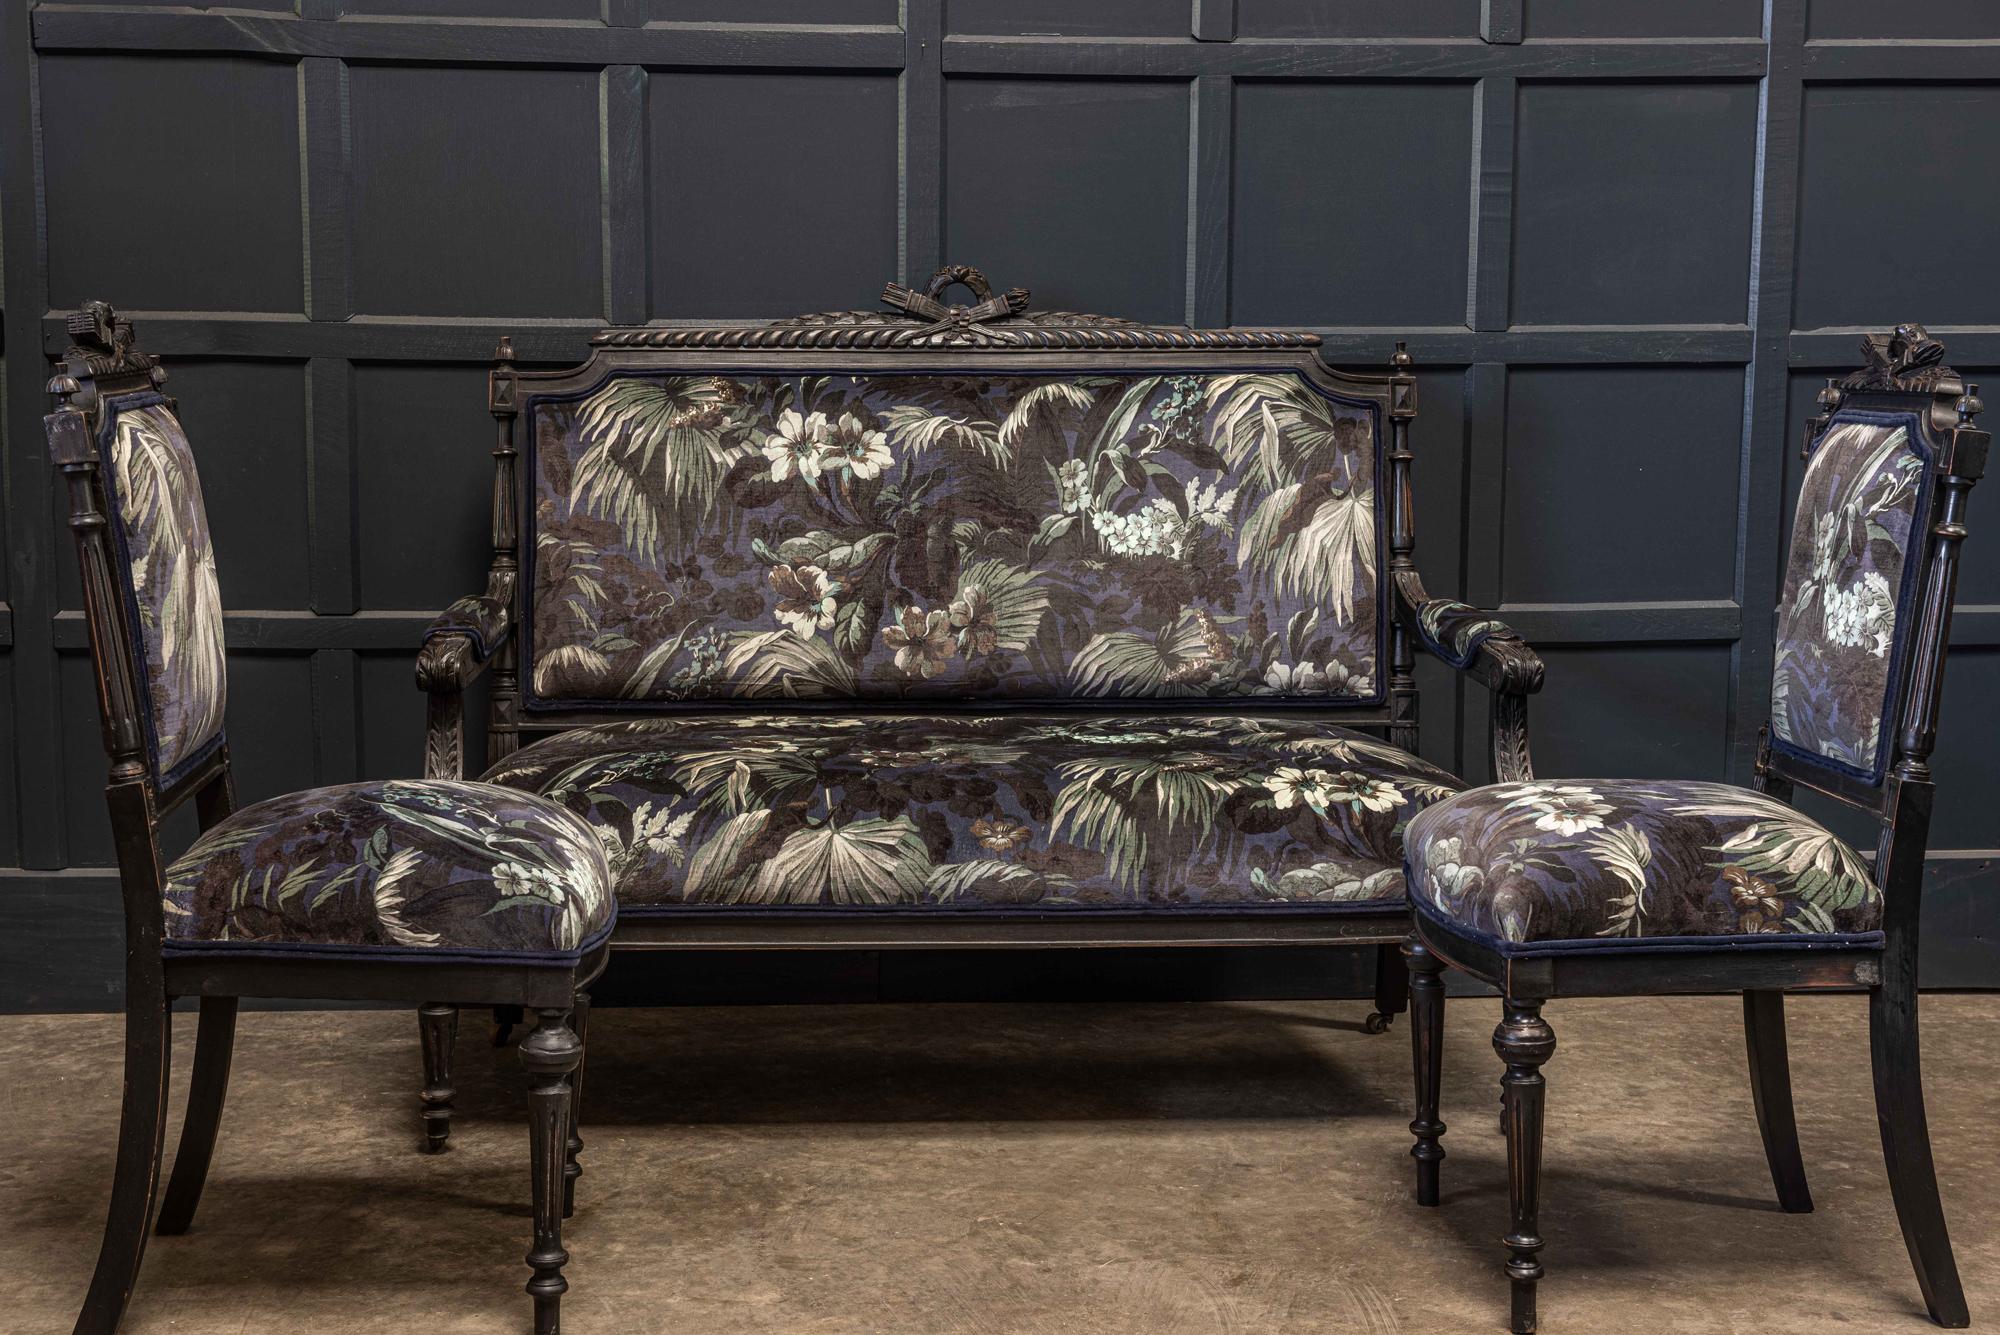 19th century Napoleon III ebonized salon suite, sourced from Paris and reupholstered in 'Limerence' velvet,

circa 1860.

Measures: Sofa
H 107 x W 136 x D 55cm
Seat height 45cm

Chairs
H 99 x D 45 x W 41cm
Seat height 45cm.